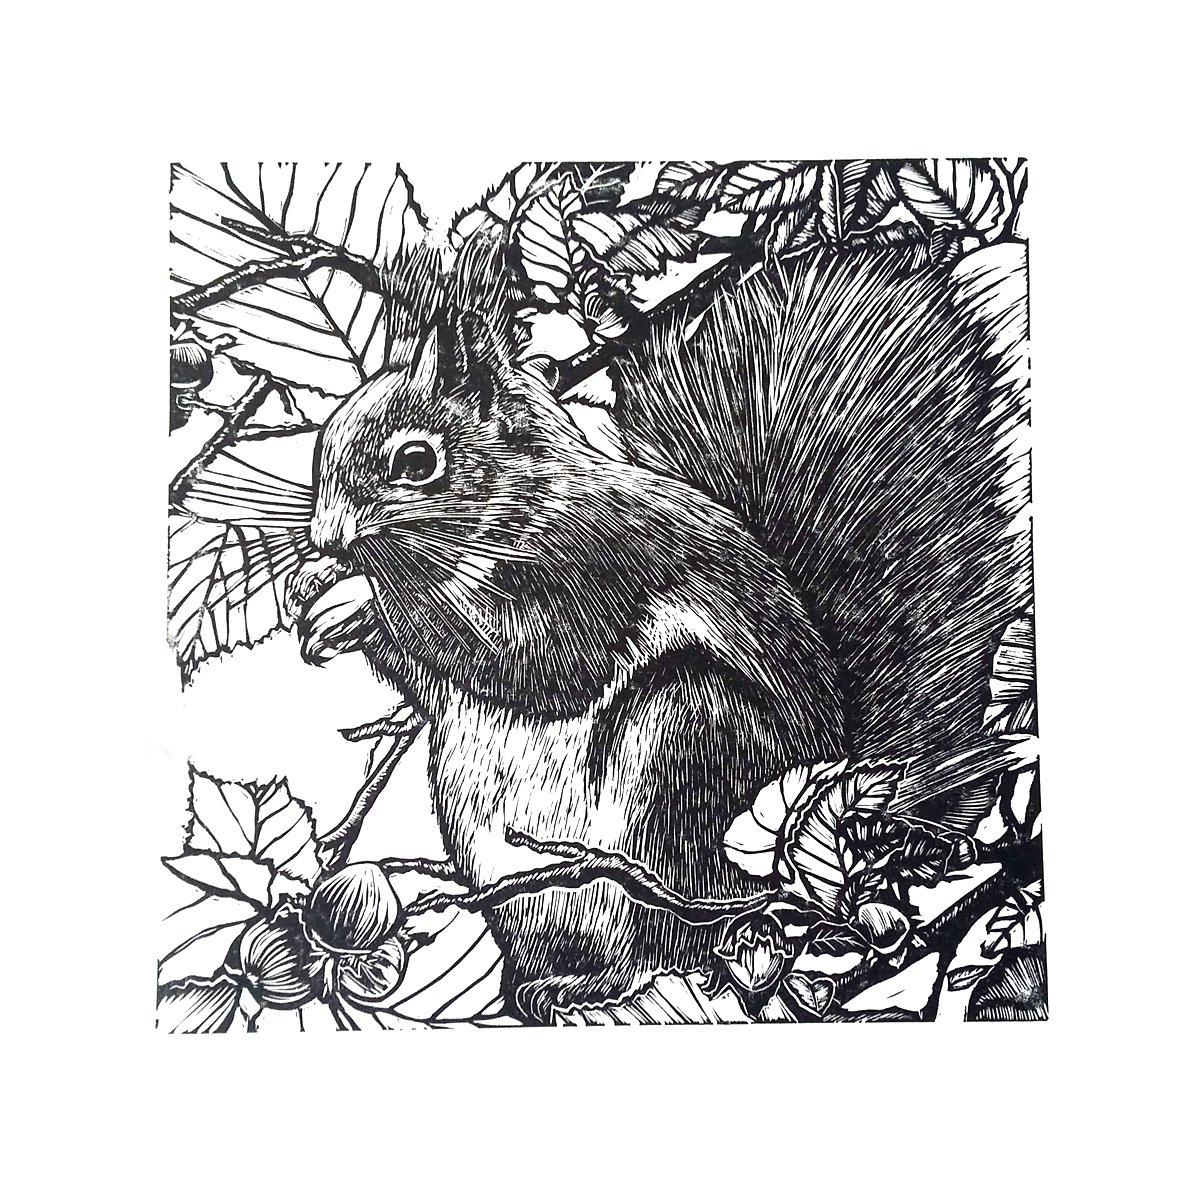 Natures feast (black and white version - linocut red squirrel) by Carolynne Coulson